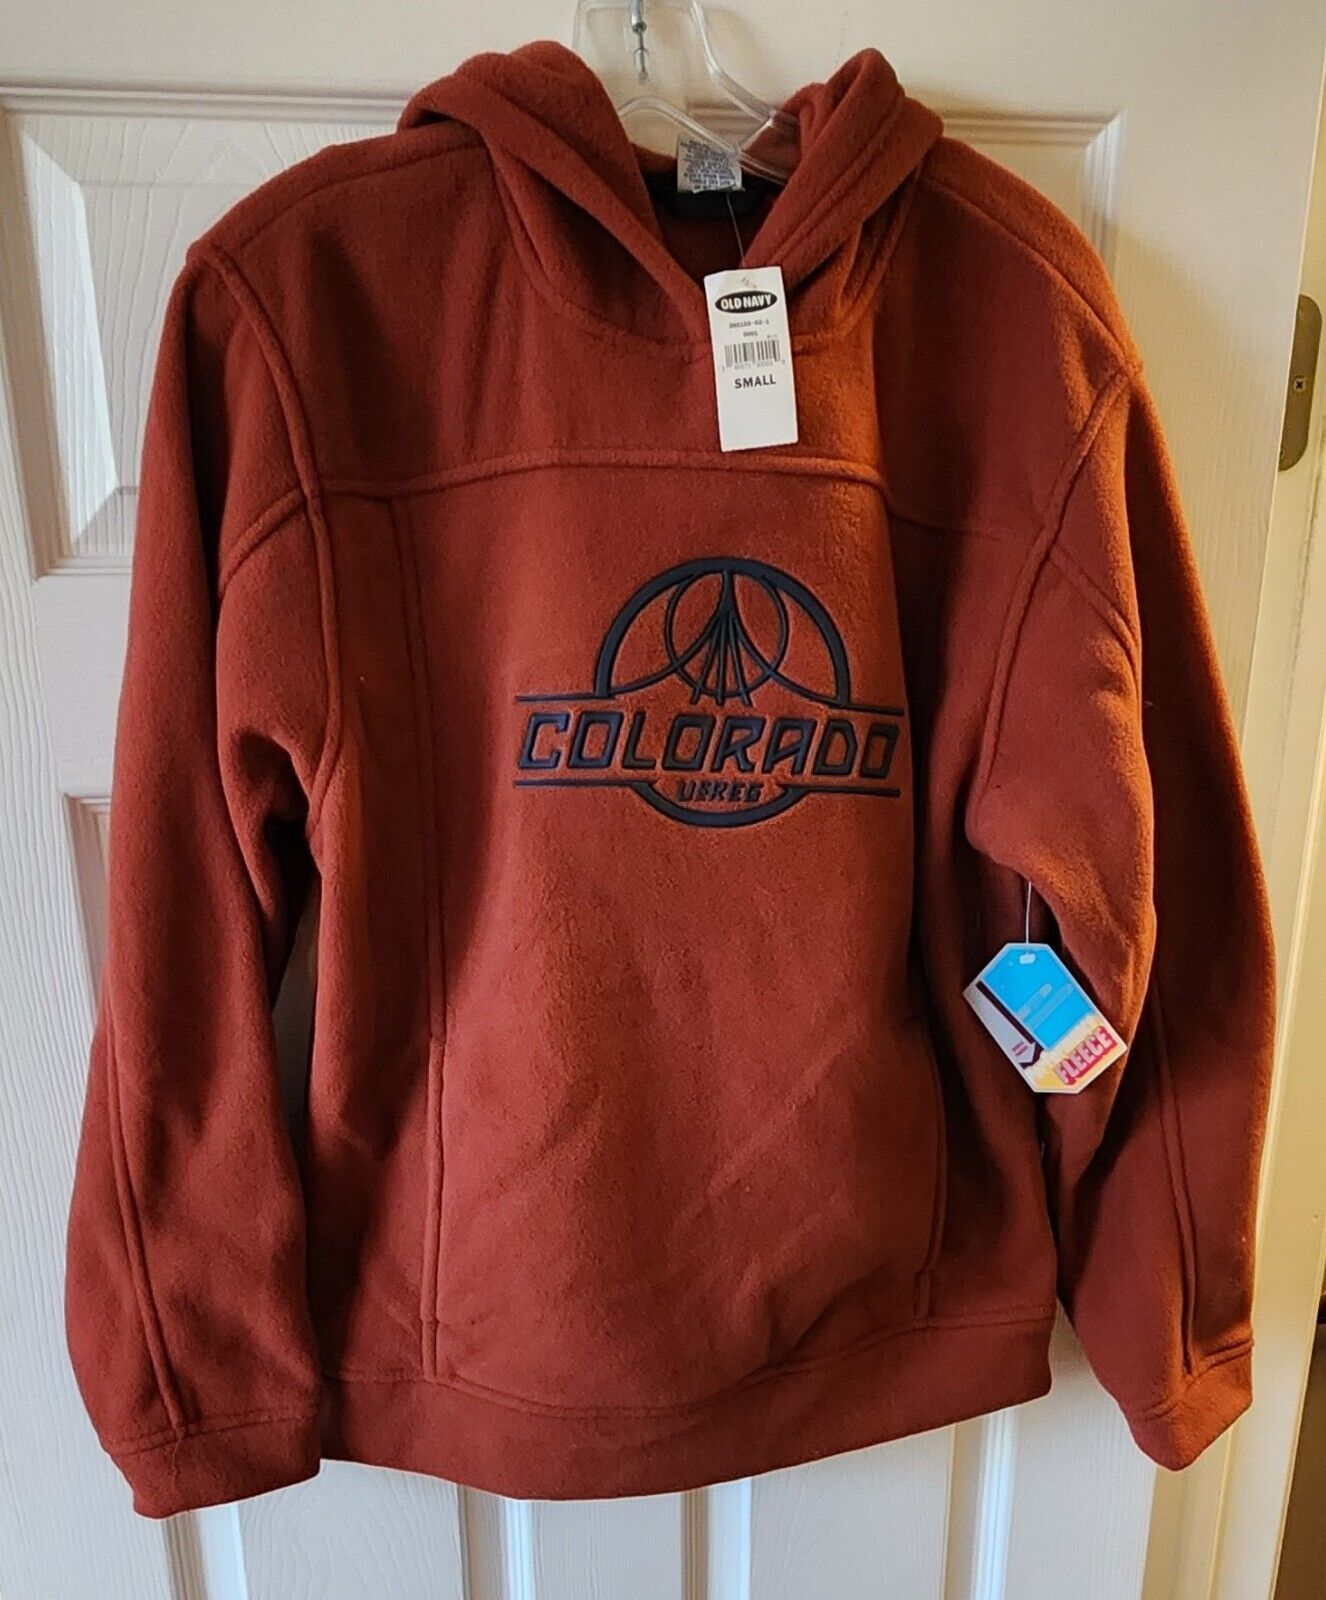 Primary image for Old Navy Performance Fleece Pullover Hoodie - Rust - Small - Colorado UsREG Logo